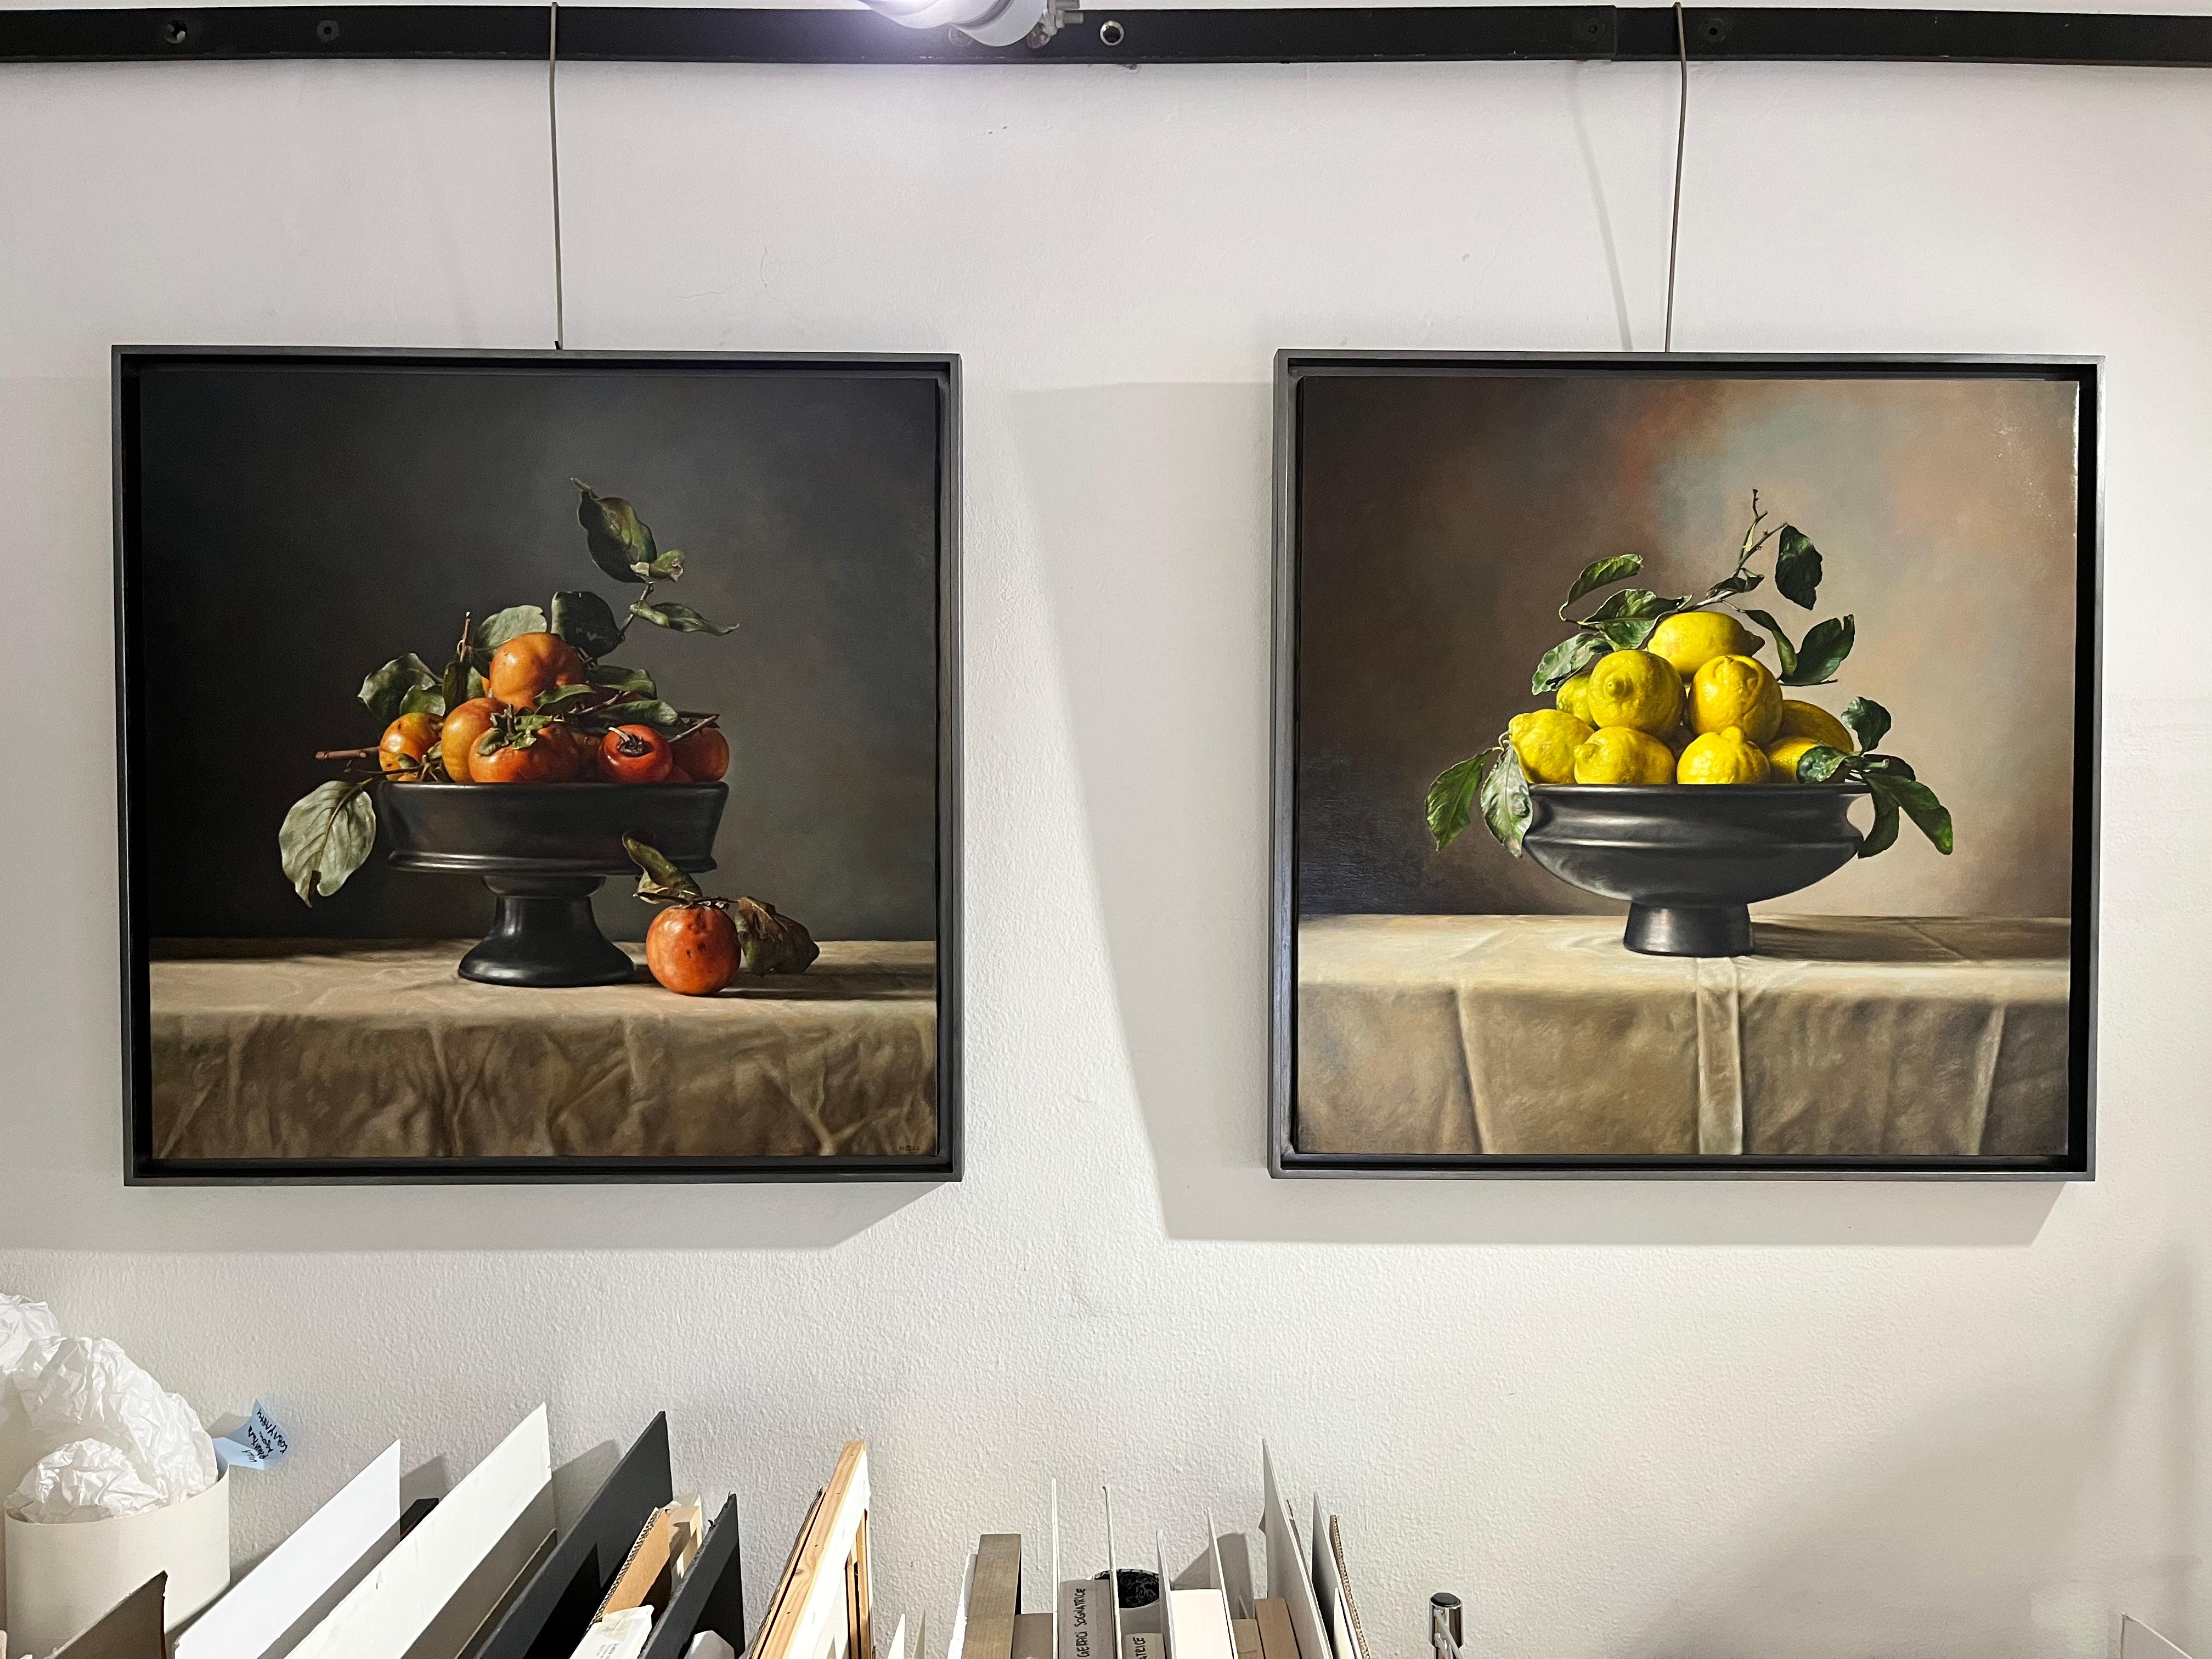 The refined and unique still life has an eventual painting with persimmons, which is thought of as an ideal pair. The painting was also published on 1stdibs. The large size and exquisite finish make it a true masterpiece. 

Gianluca Corona expresses